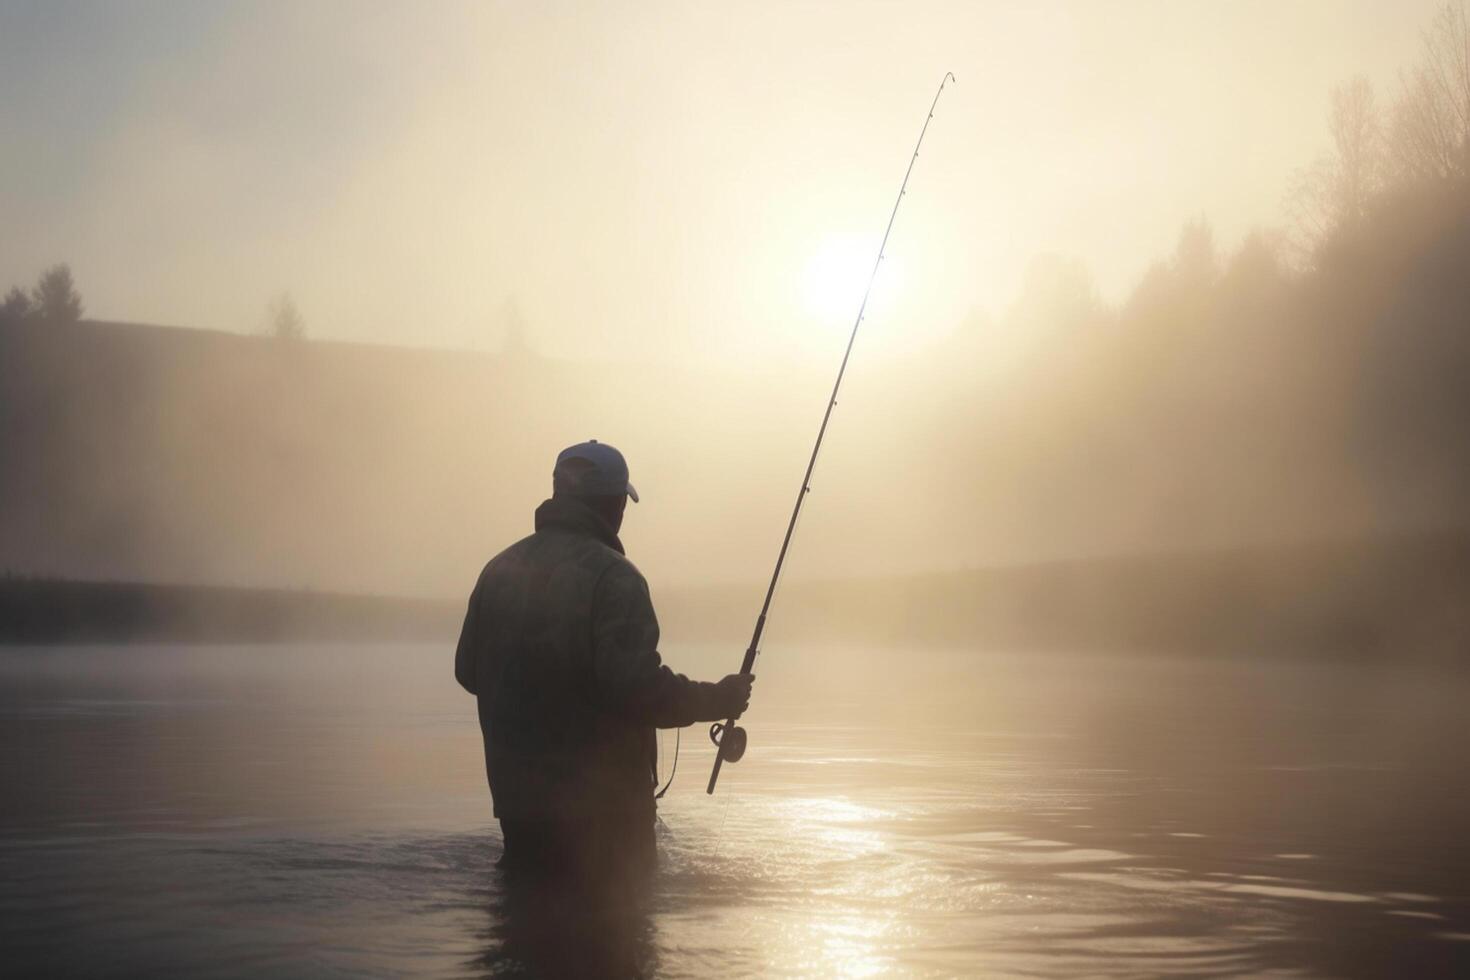 Fishing at Dawn Angler in the misty lake with fishing rod photo